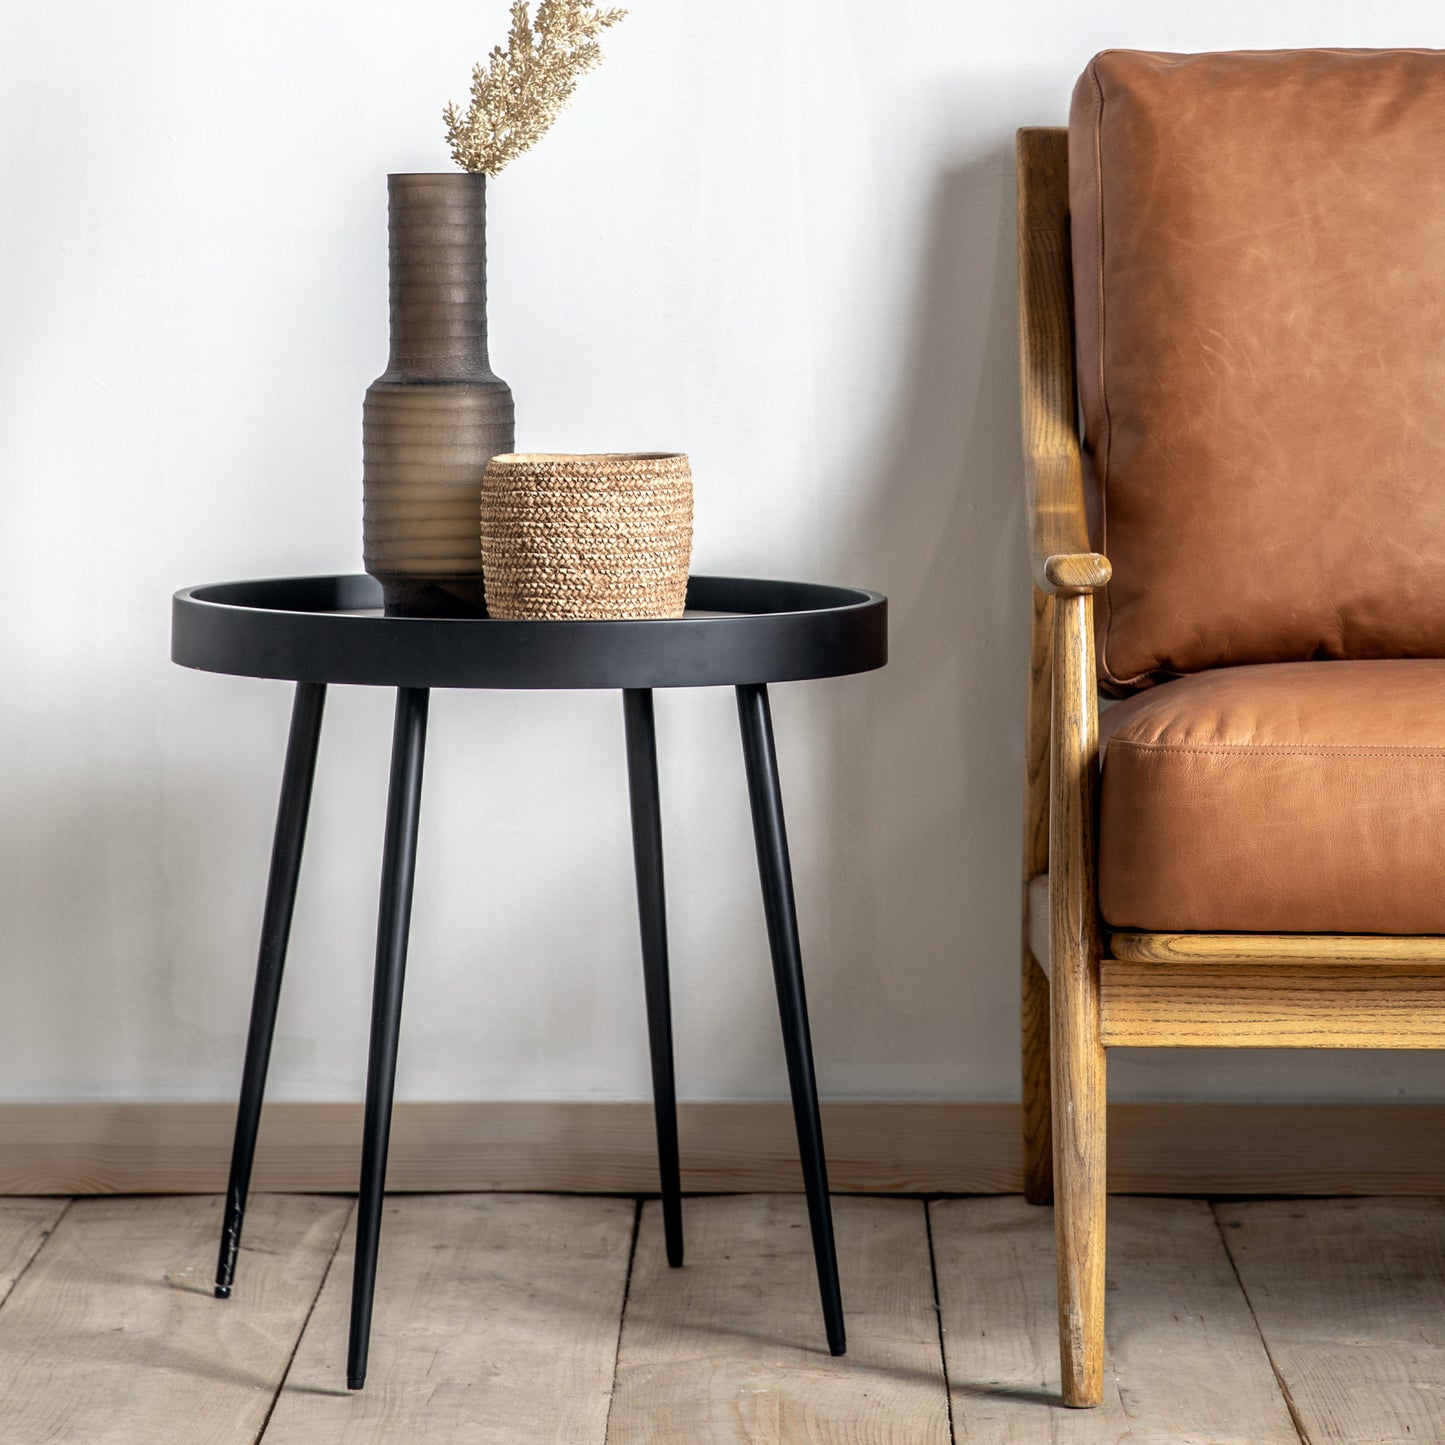 A Pelham Side Table 500x500x500mm from Kikiathome.co.uk, an interior decor piece, next to a brown leather chair.